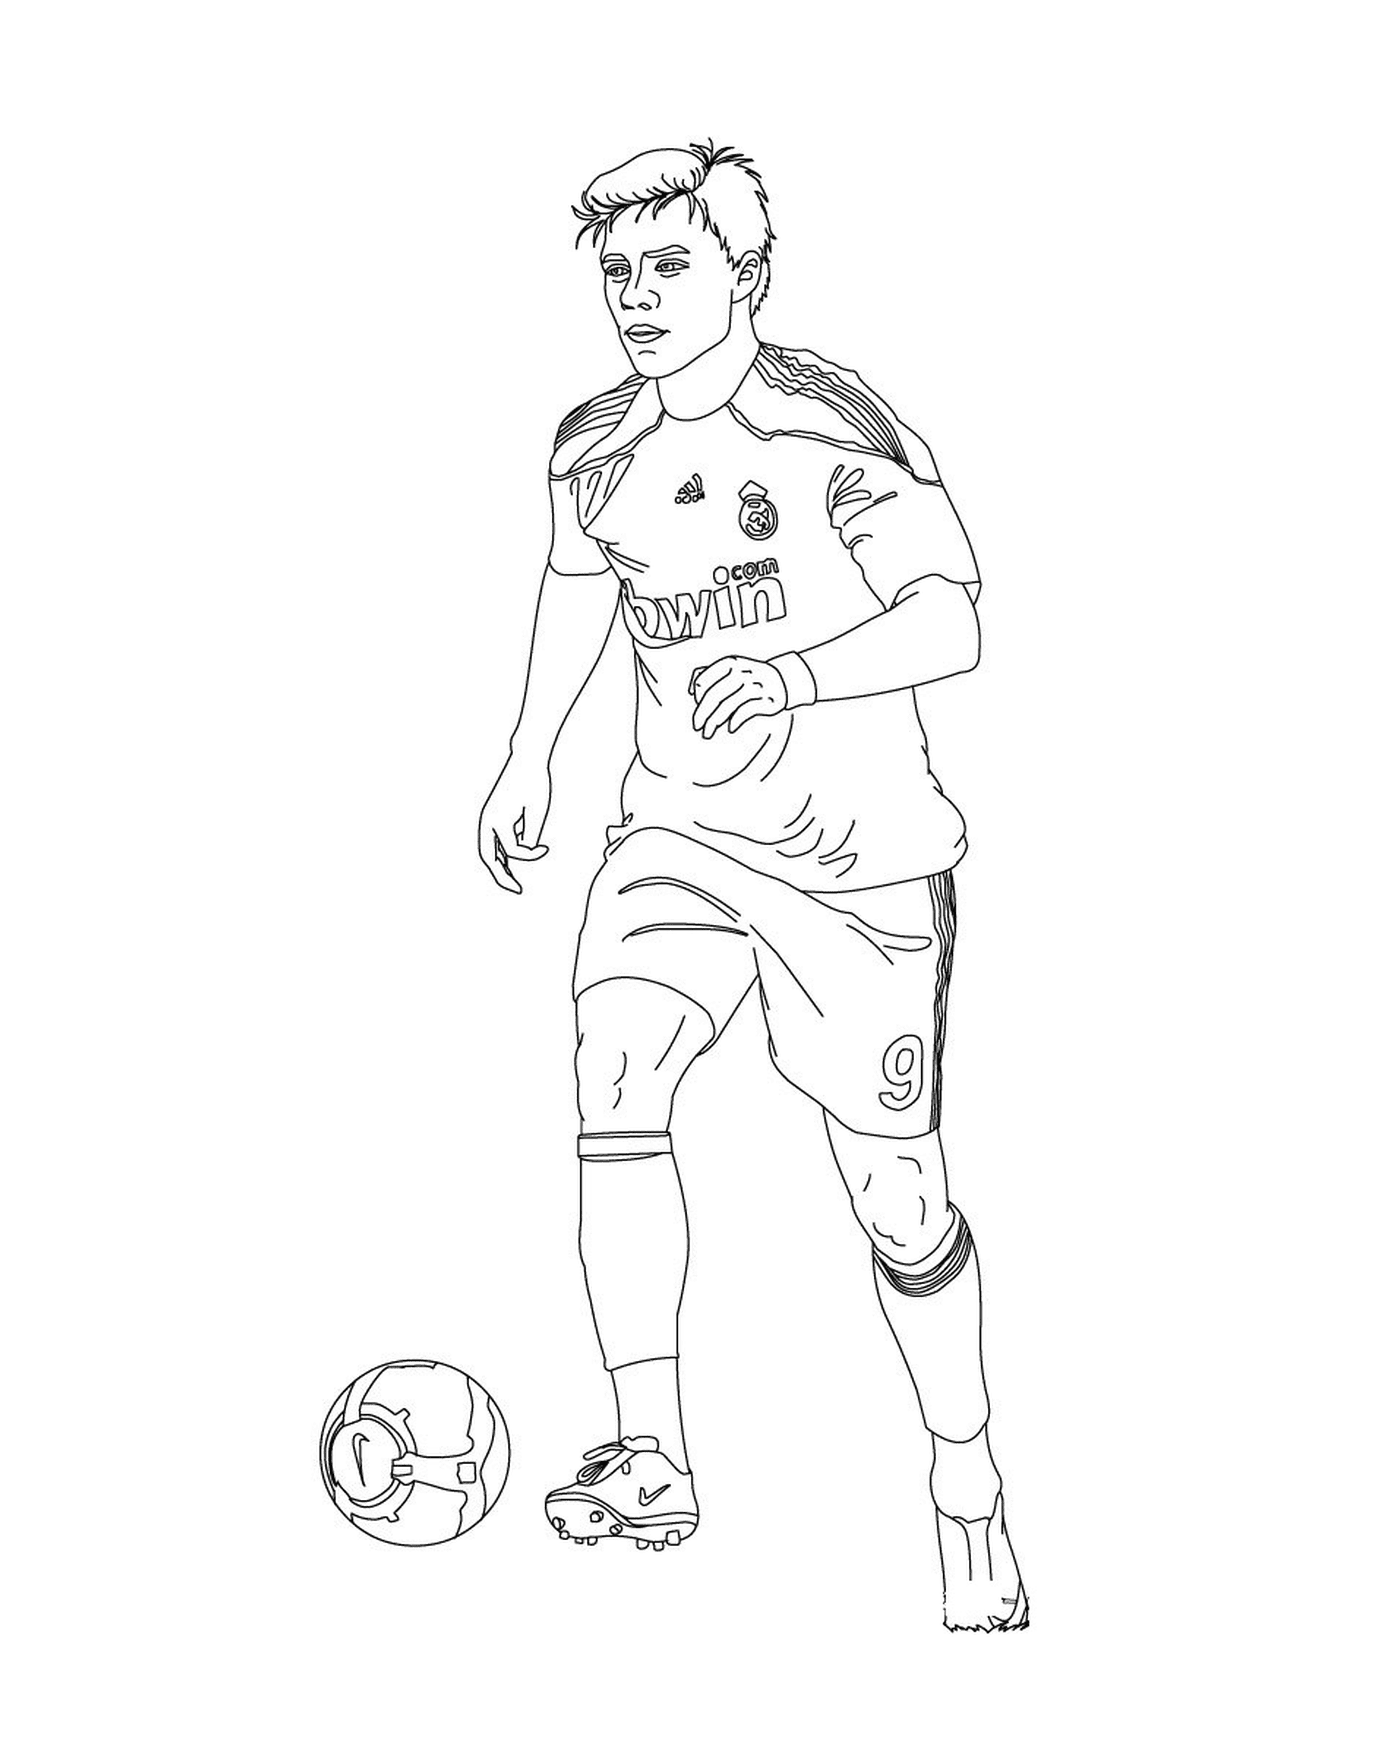  A man playing with a football 